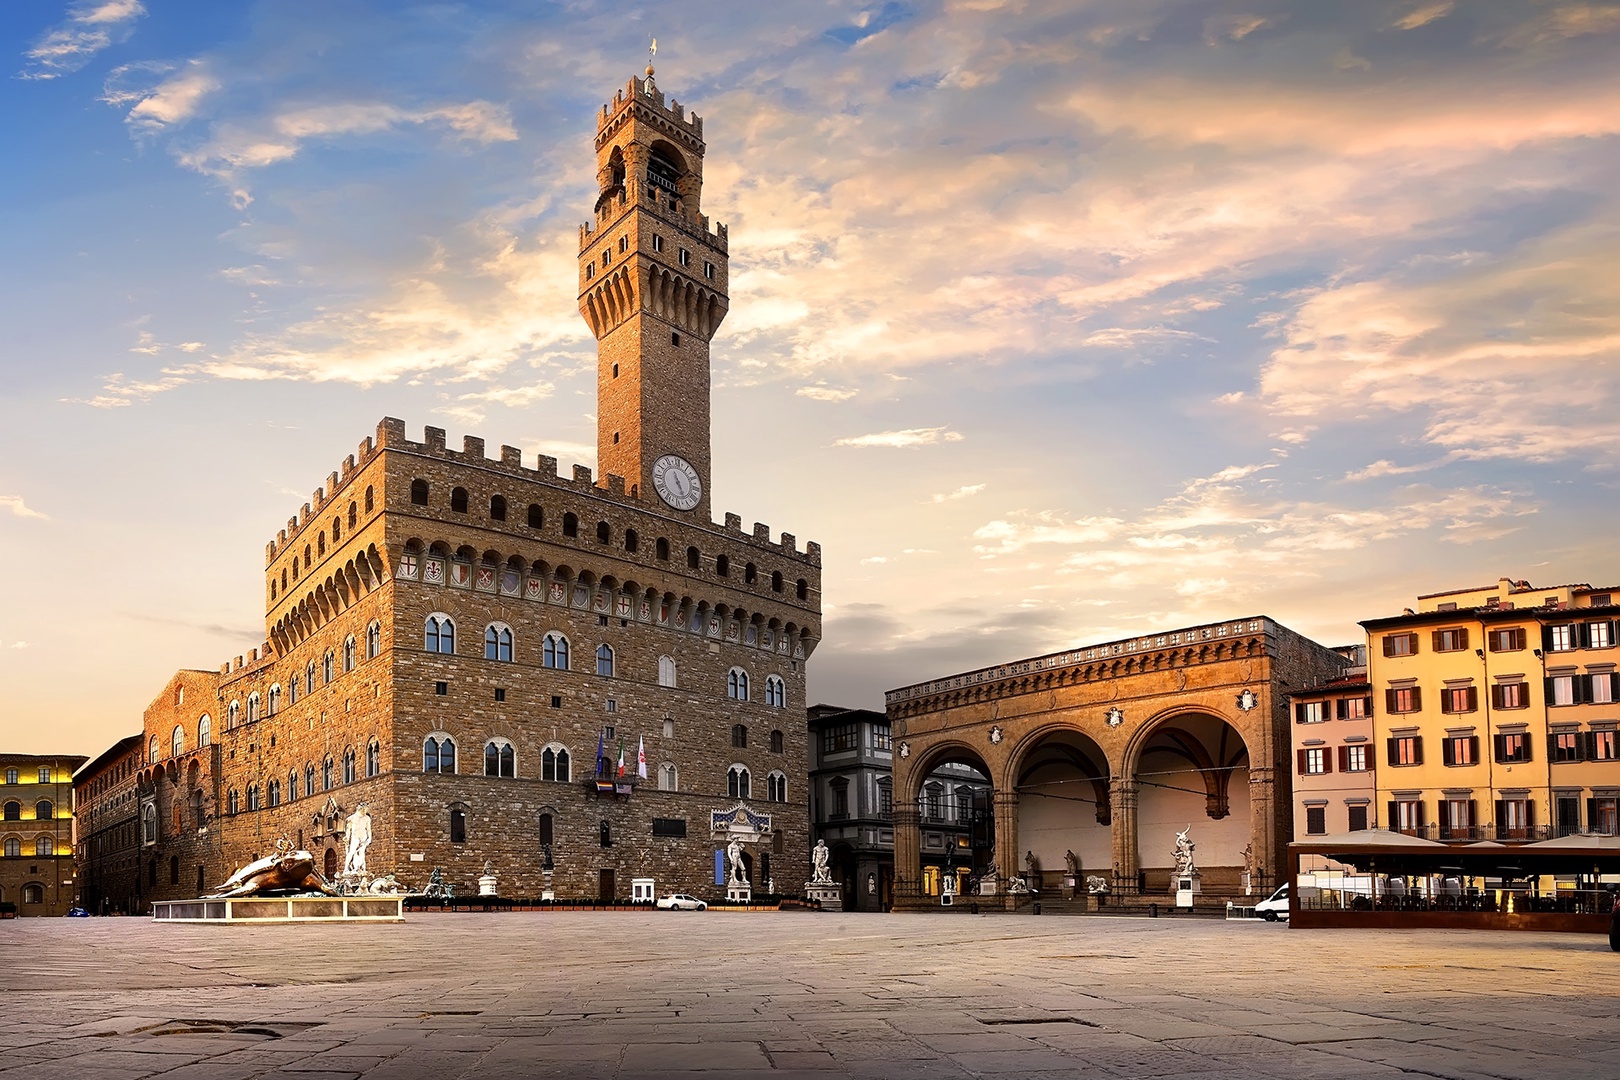 Piazza Signoria was the heart of Florence during the Renaissance. Everywhere you look find fascinating historical elements.